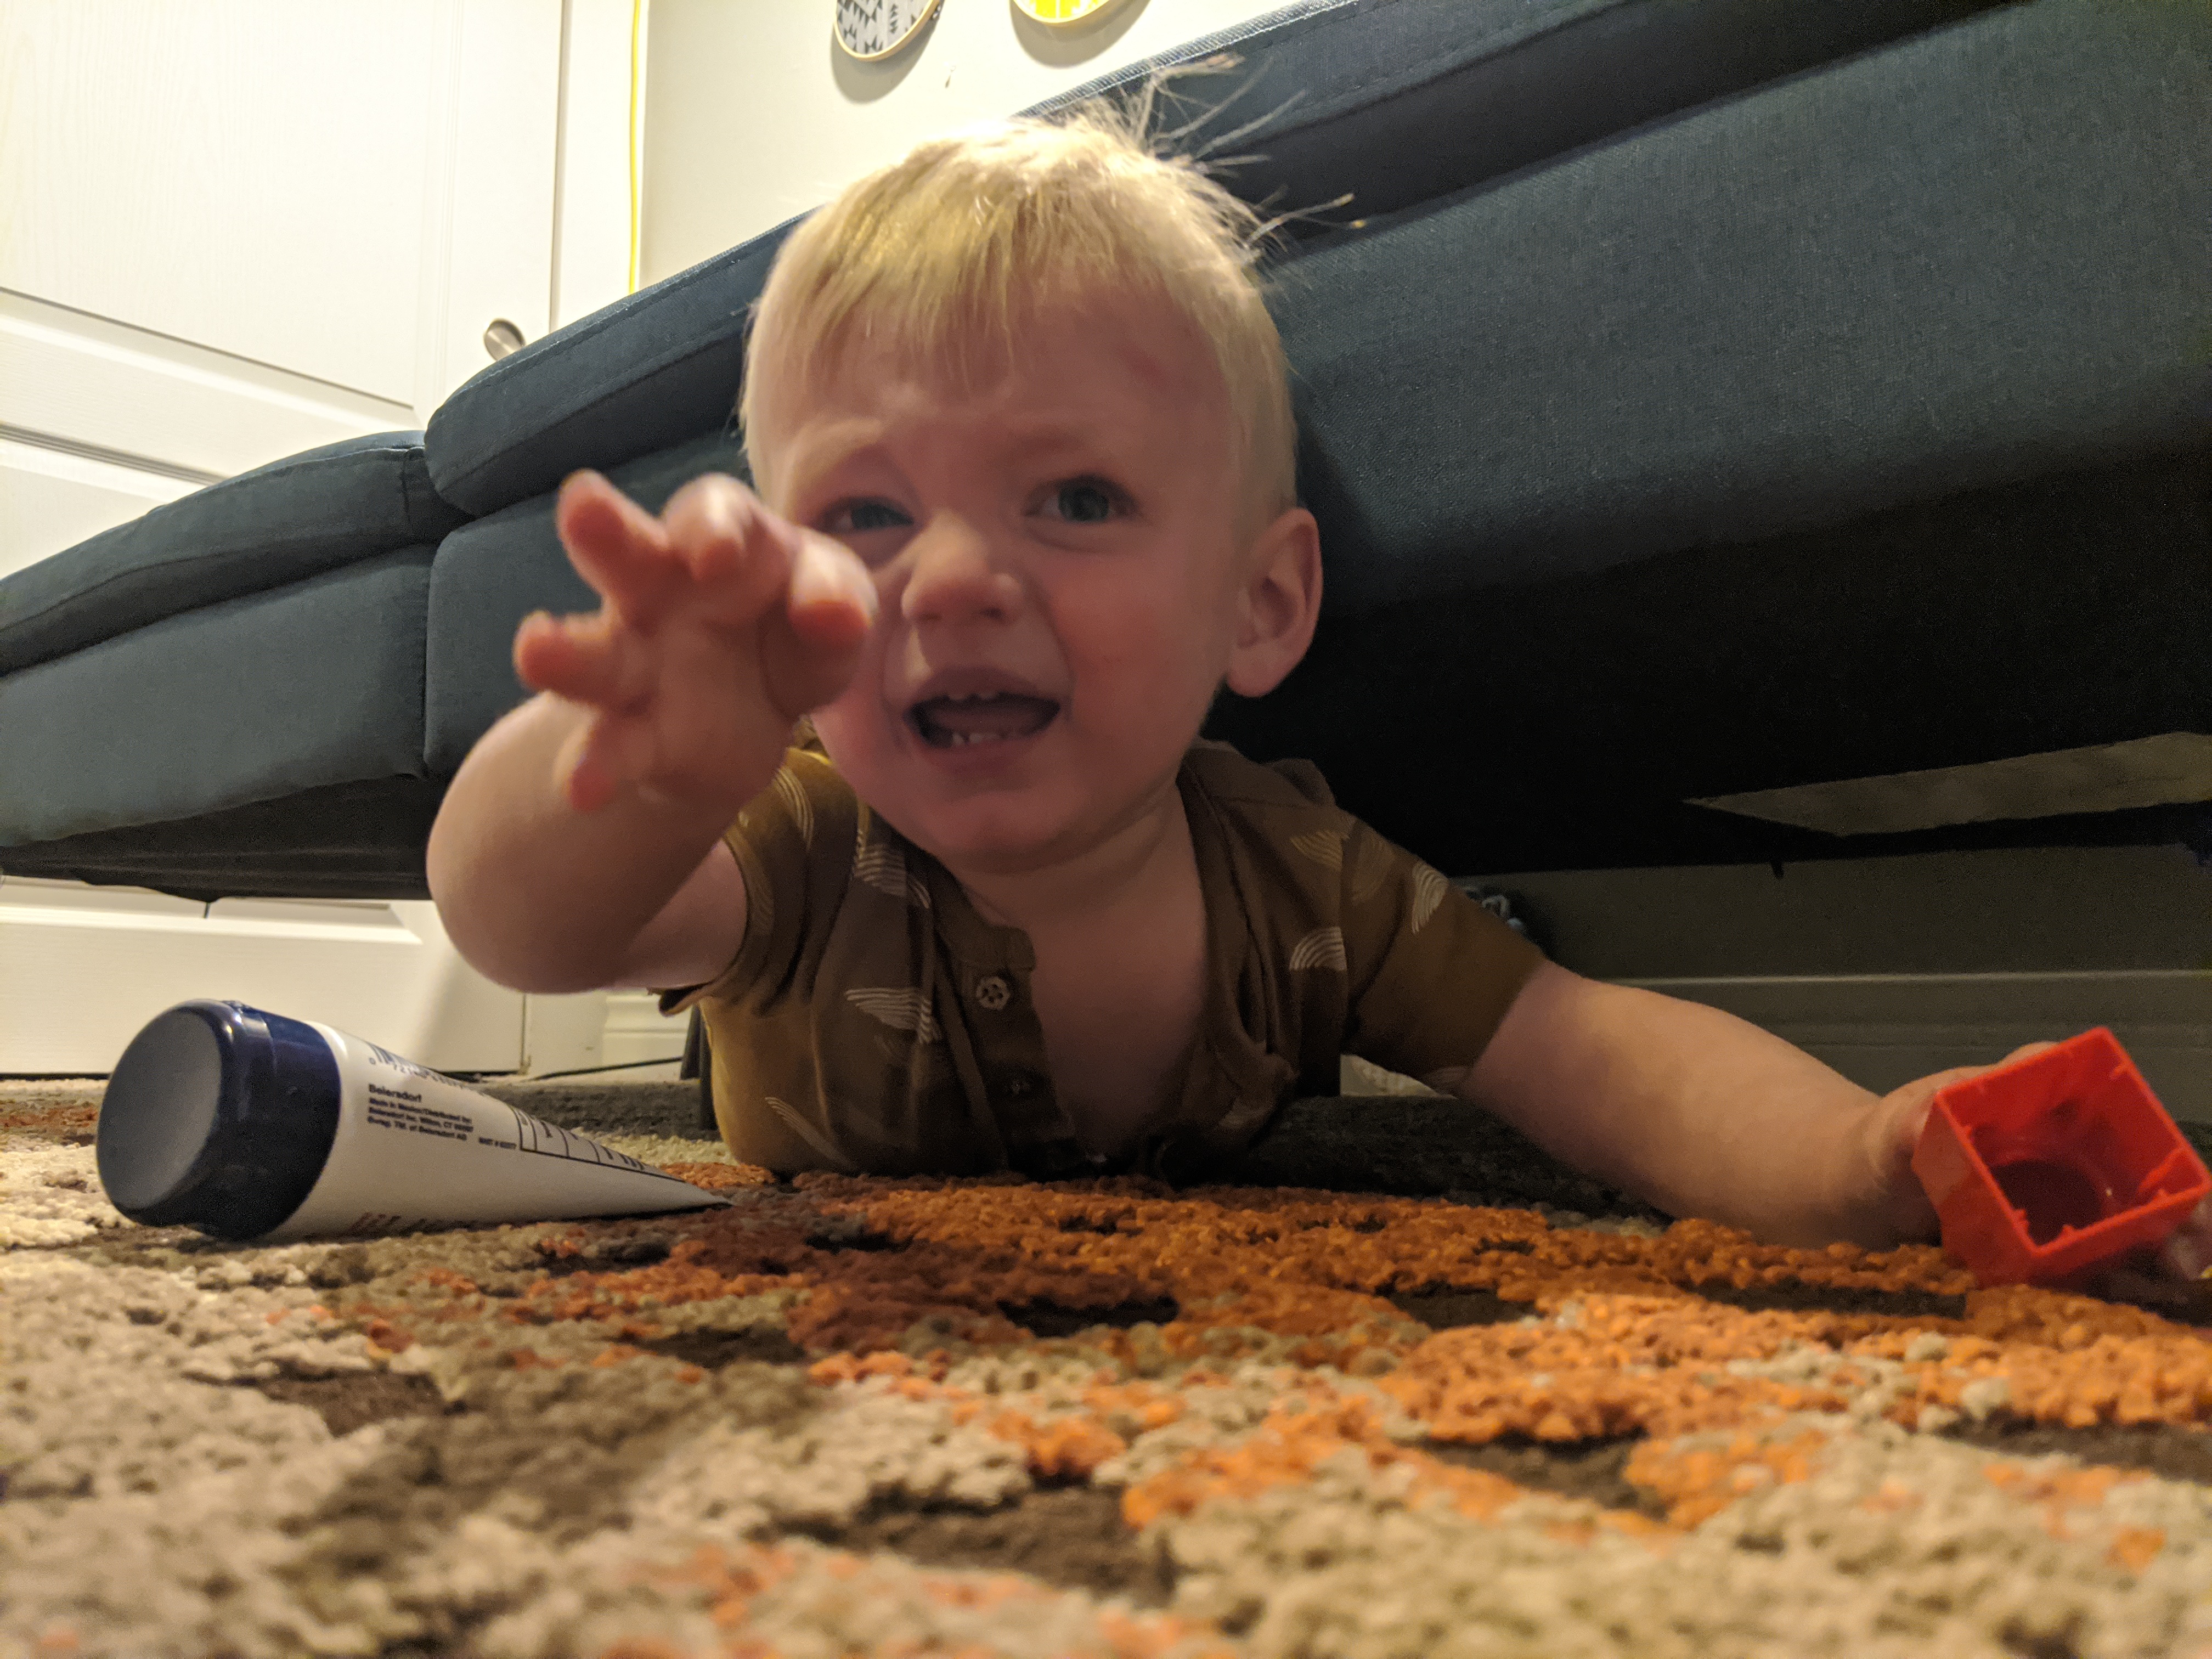 Owen goes on a reconnaissance mission under the couch.